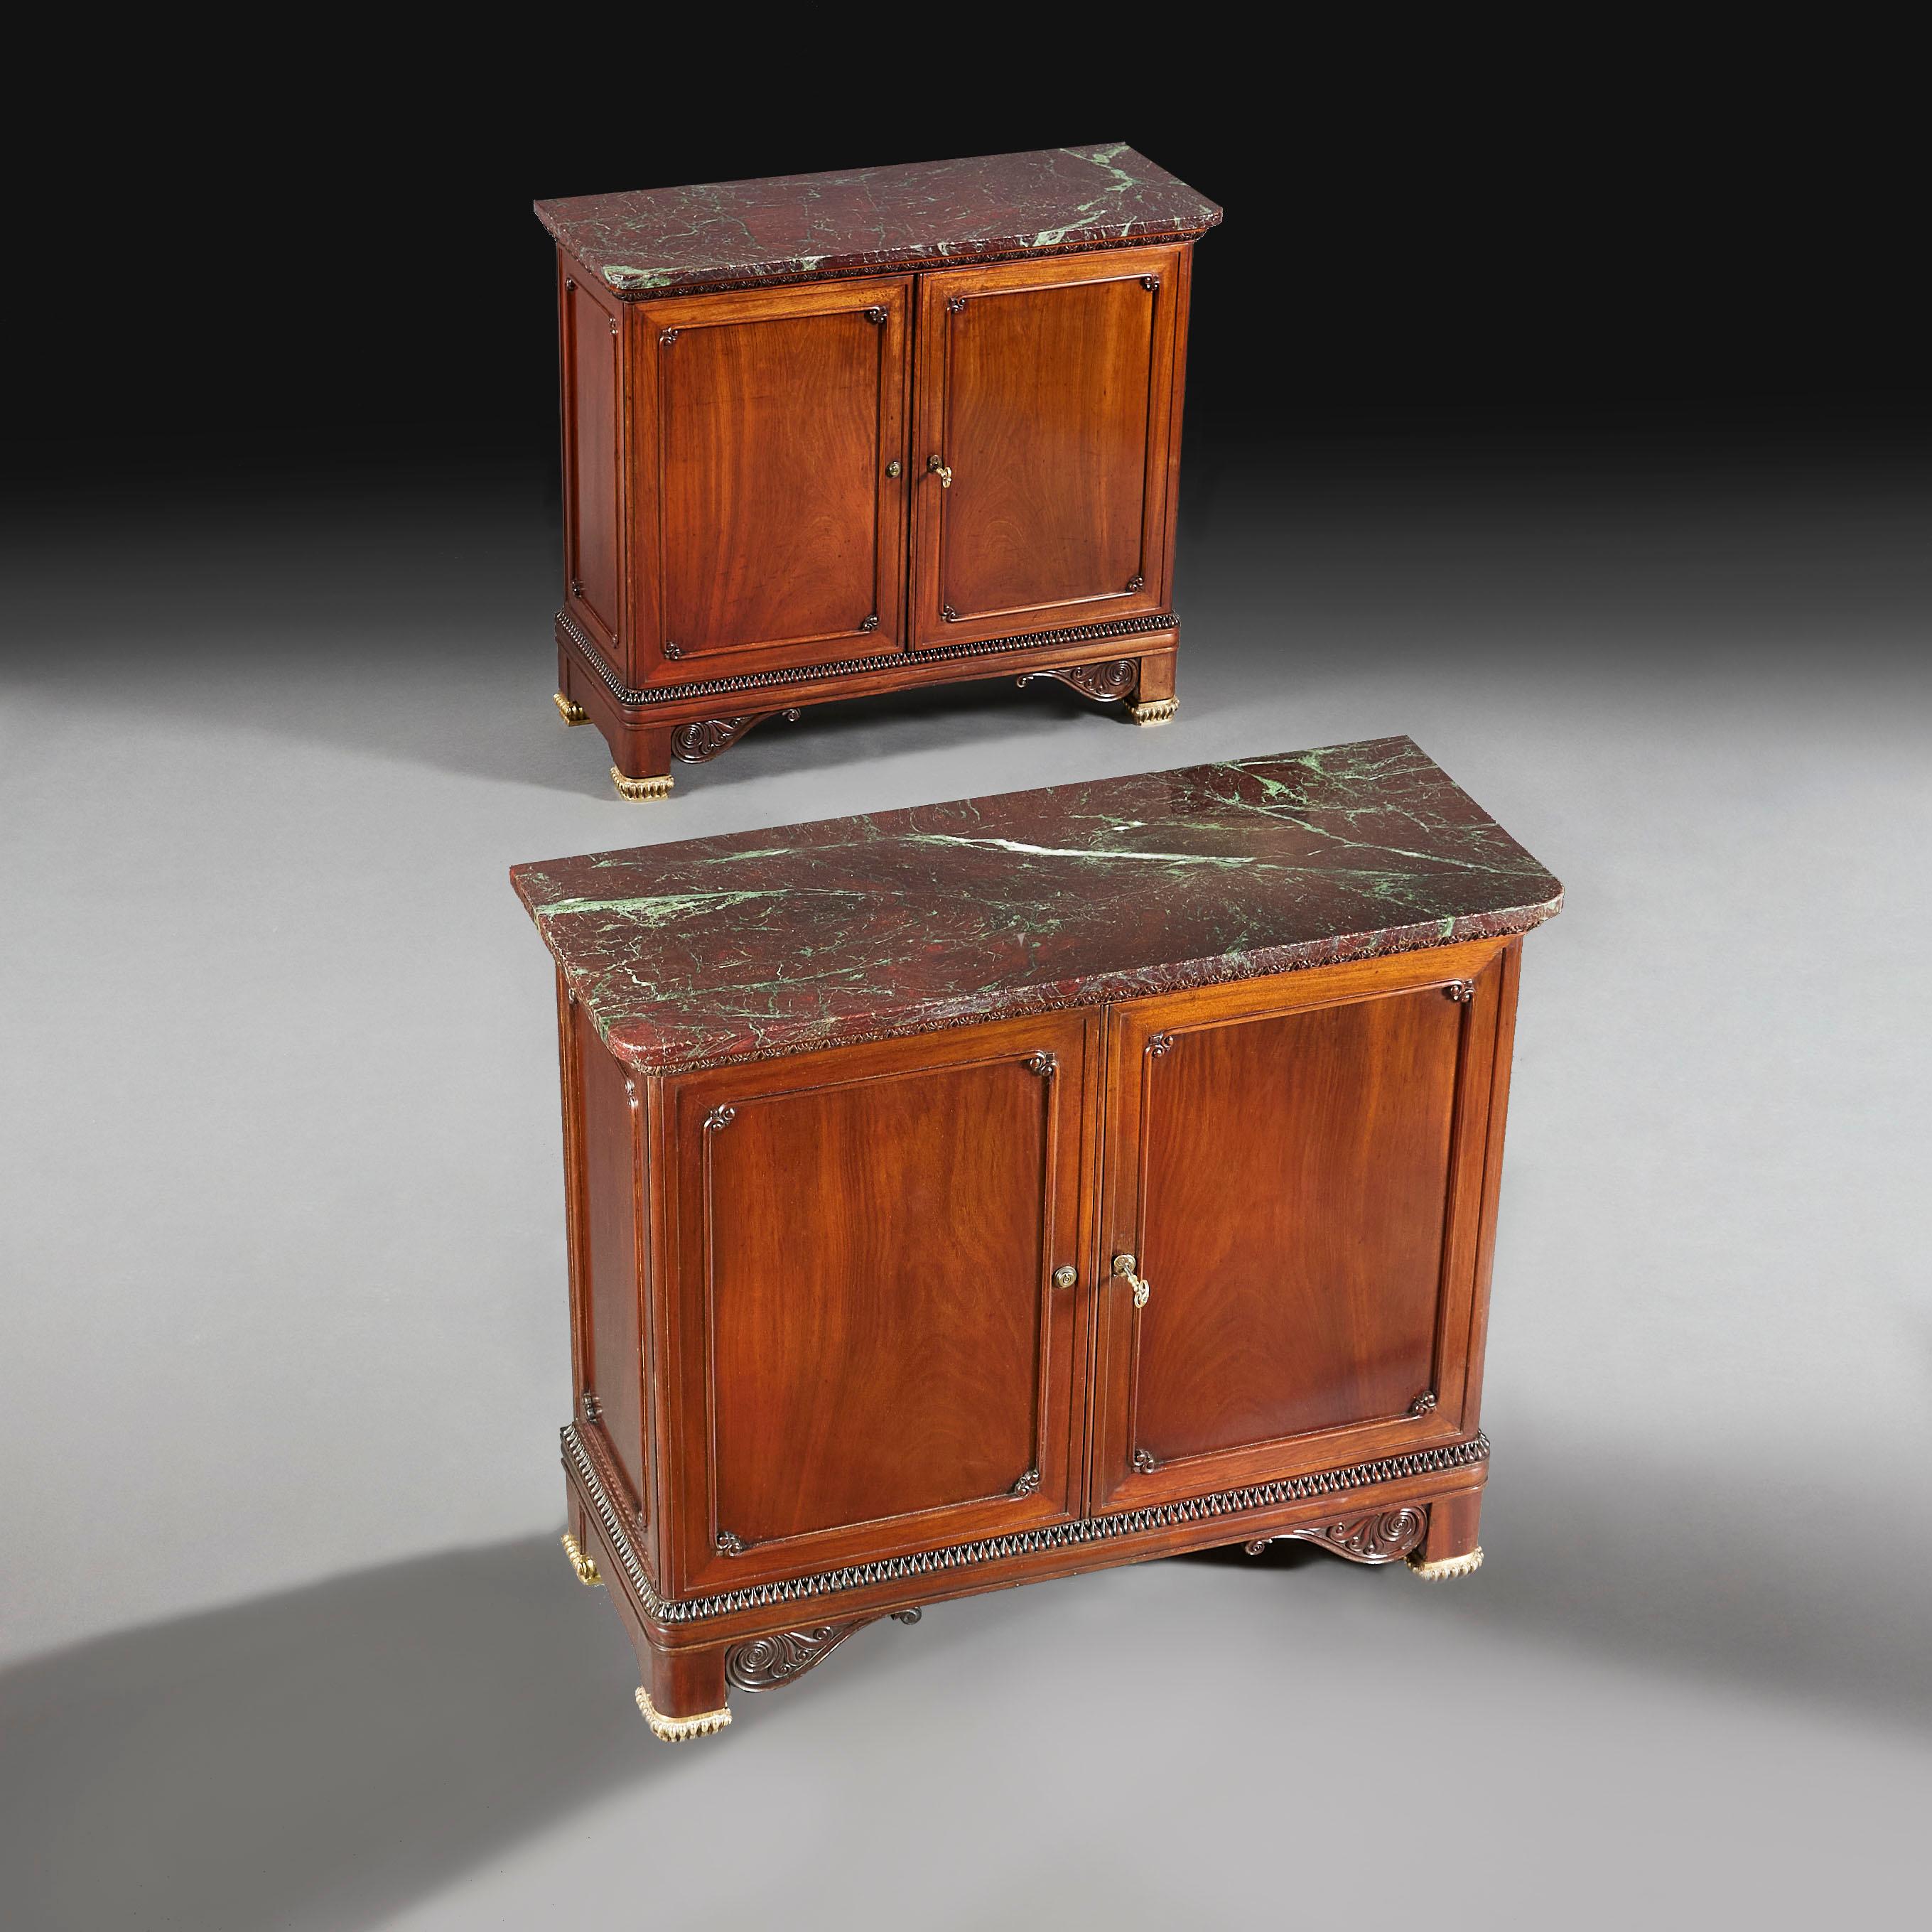 England, circa 1900

A fine pair of goncalo alves side cabinets with two panelled doors fitted with Bramah locks, shelves within, supported on square tapering feet with gilt bronze mounts and stylised anthemiums. The tops fitted with red Levanto